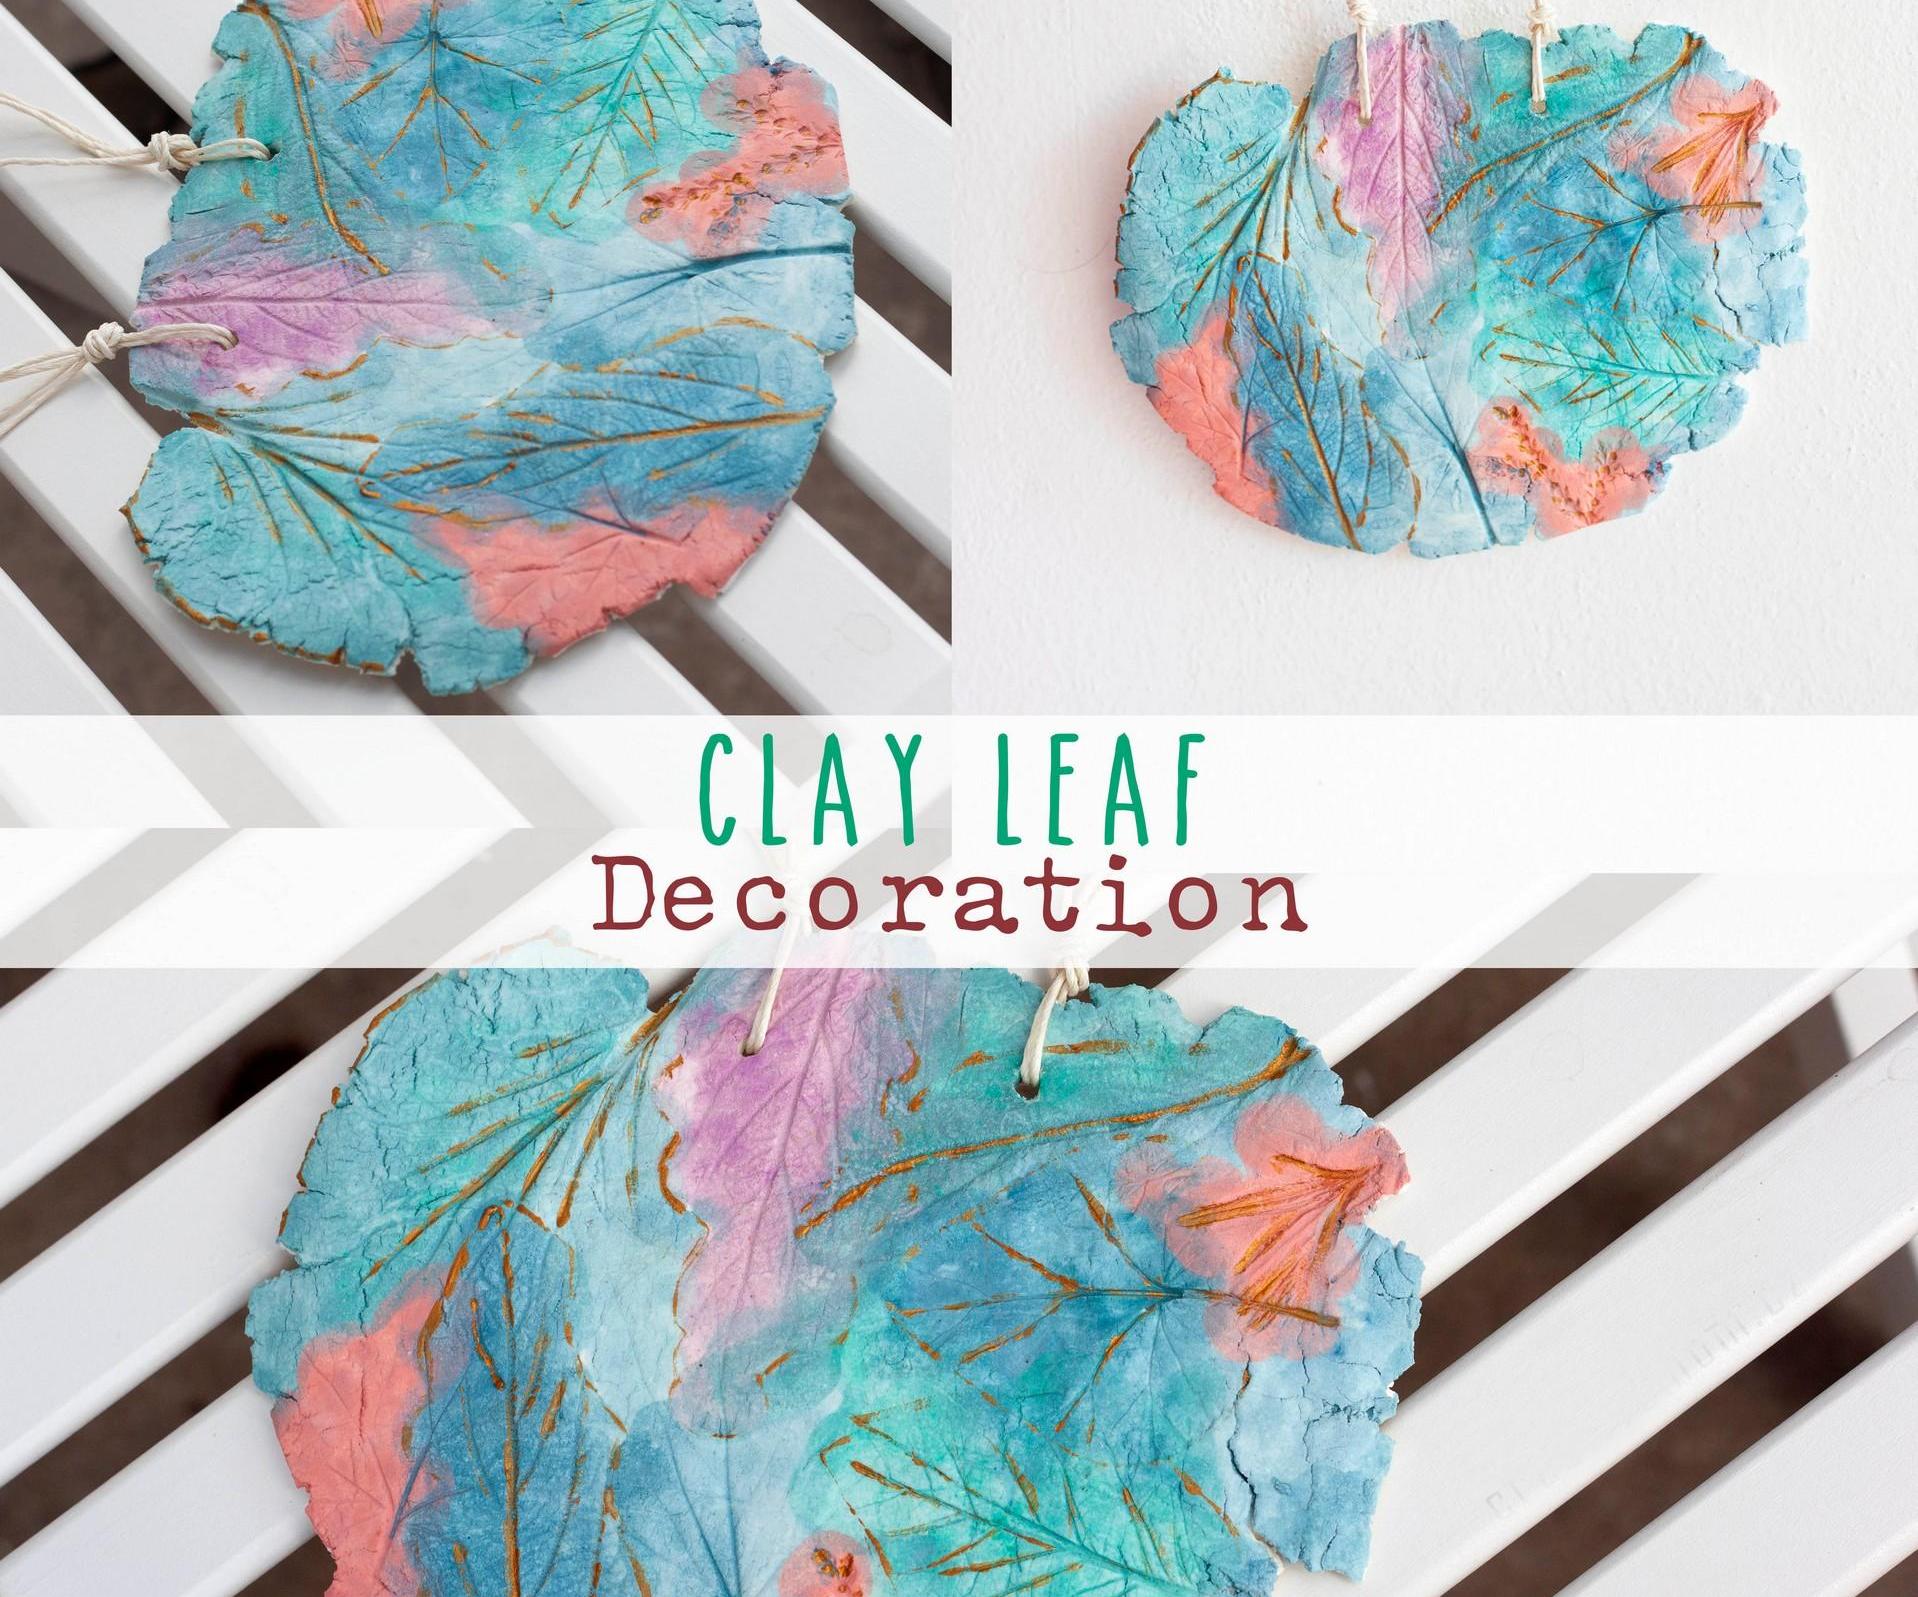 Clay Leaf Decoration made with Homemade Air Dry Clay